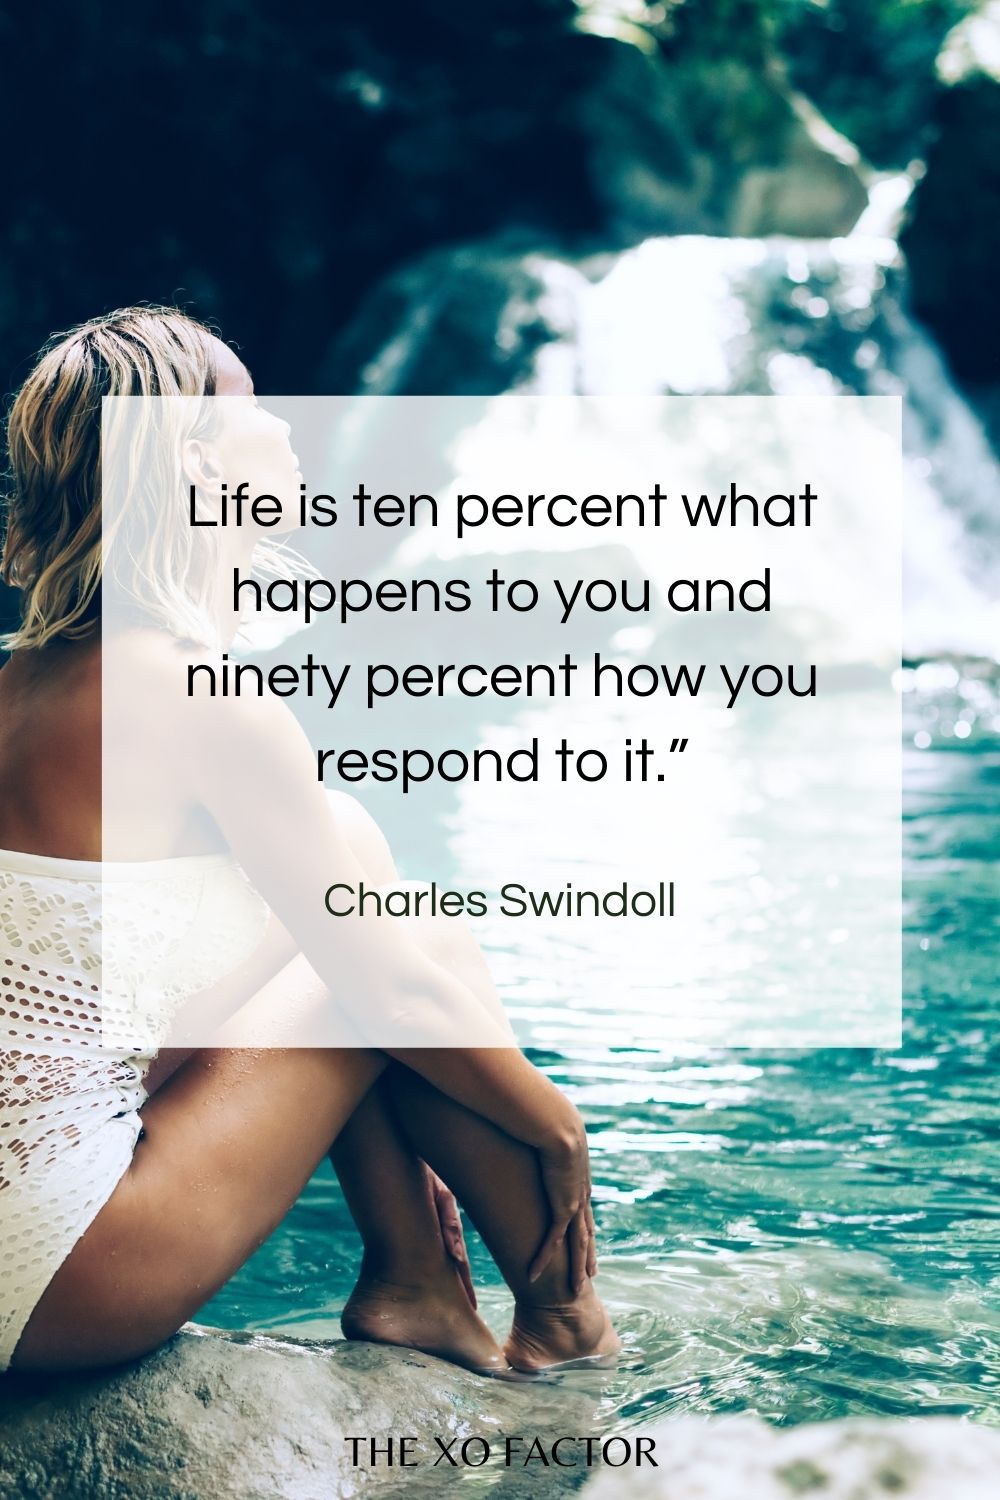 Life is ten percent what happens to you and ninety percent how you respond to it.”  Charles Swindoll